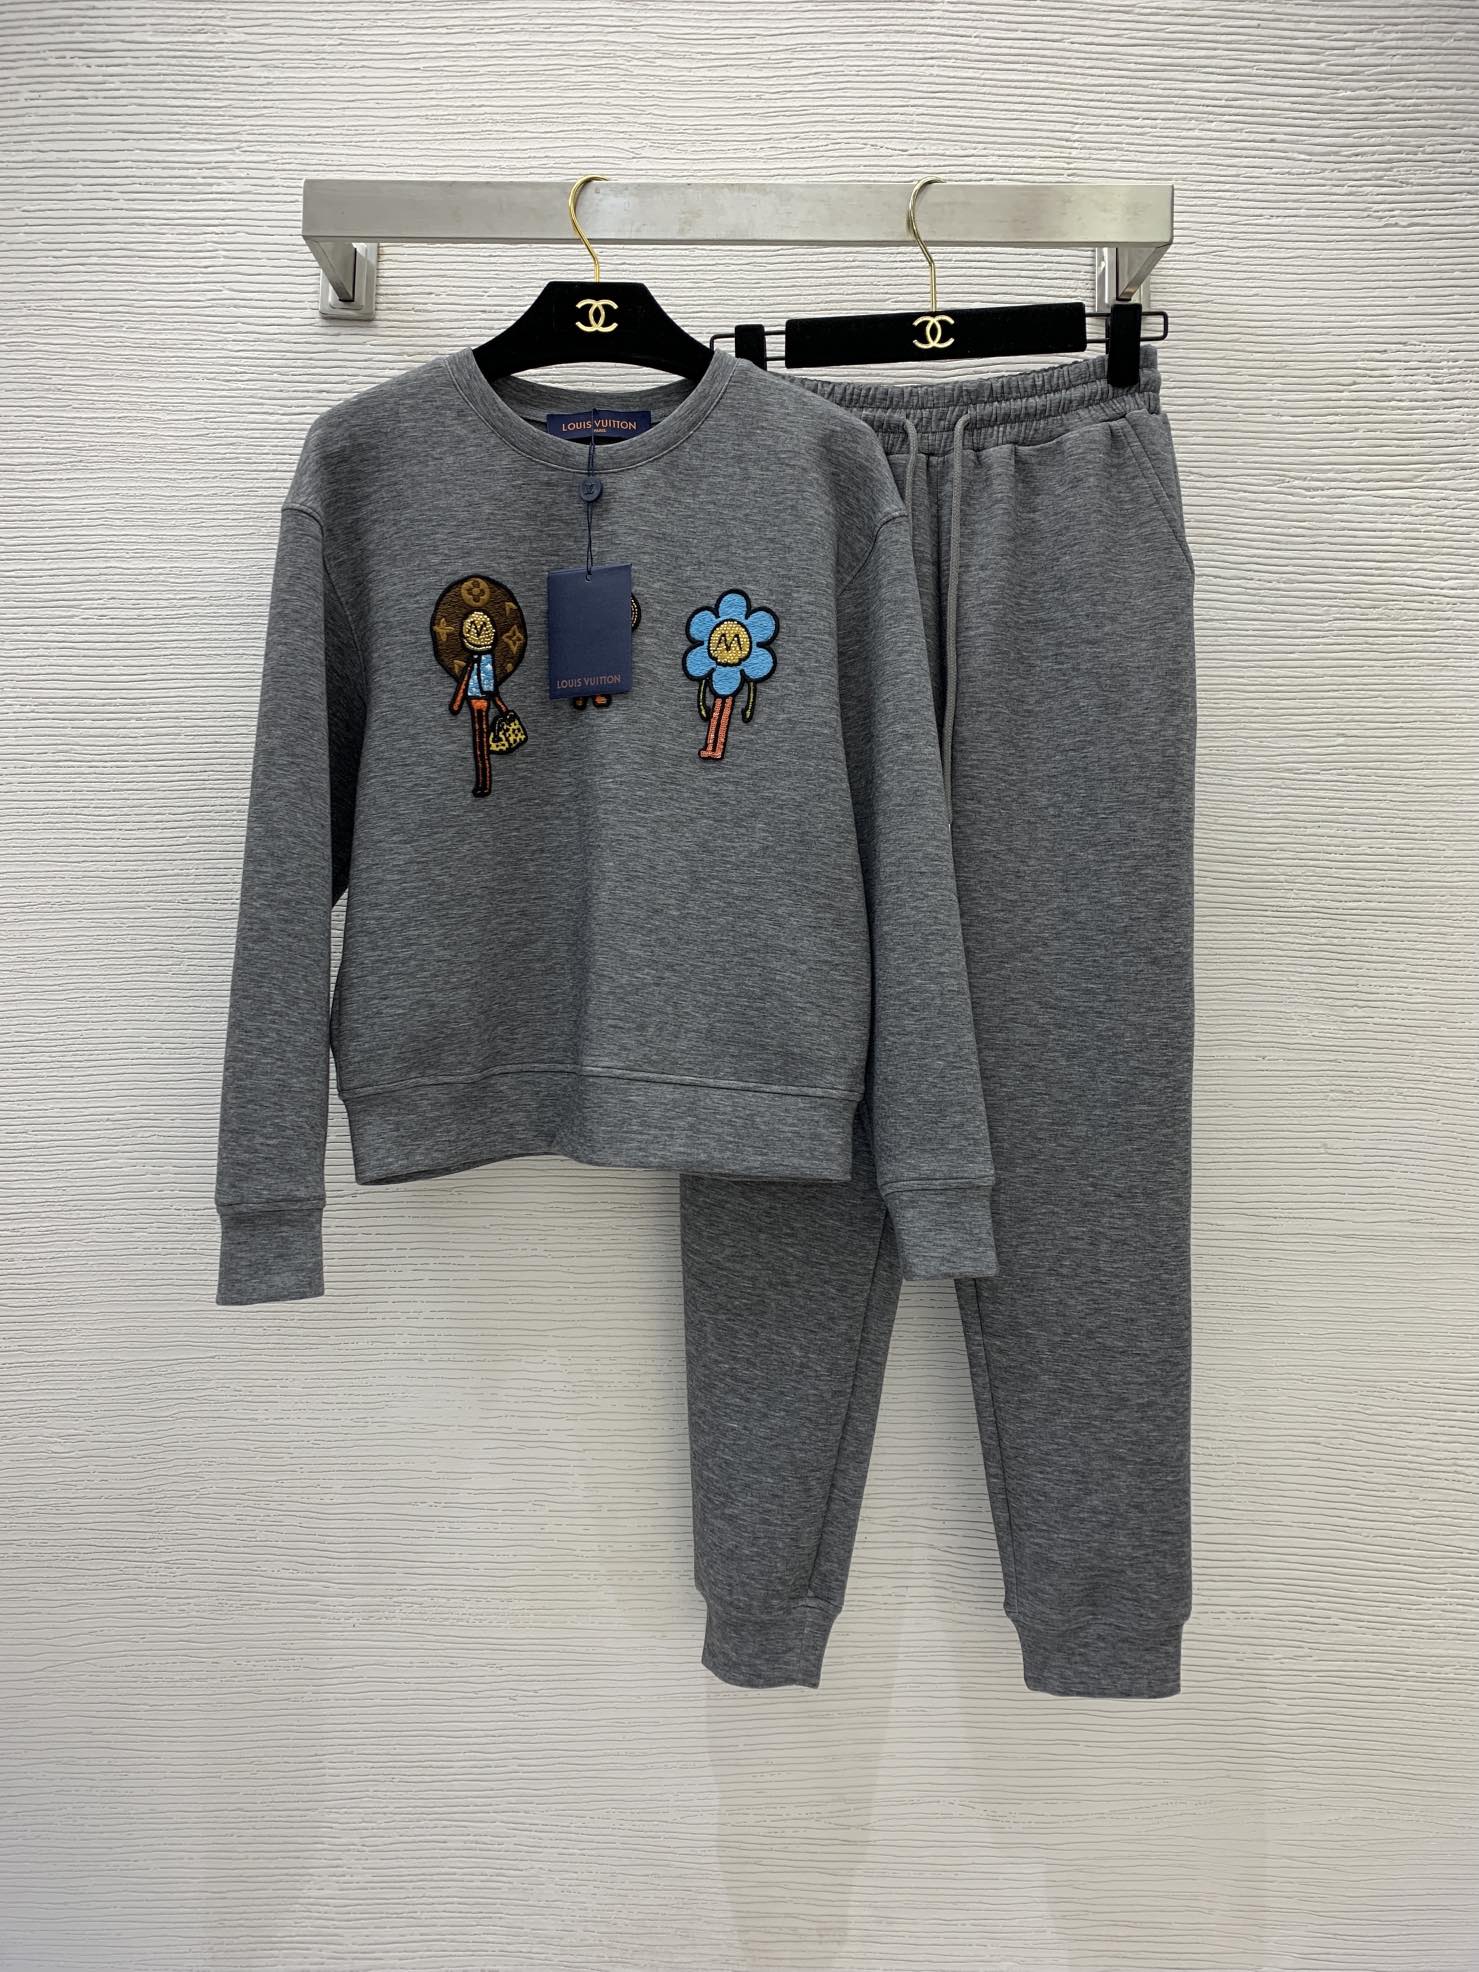 Louis Vuitton Clothing Sweatshirts Two Piece Outfits & Matching Sets Black Grey Embroidery Fashion Long Sleeve